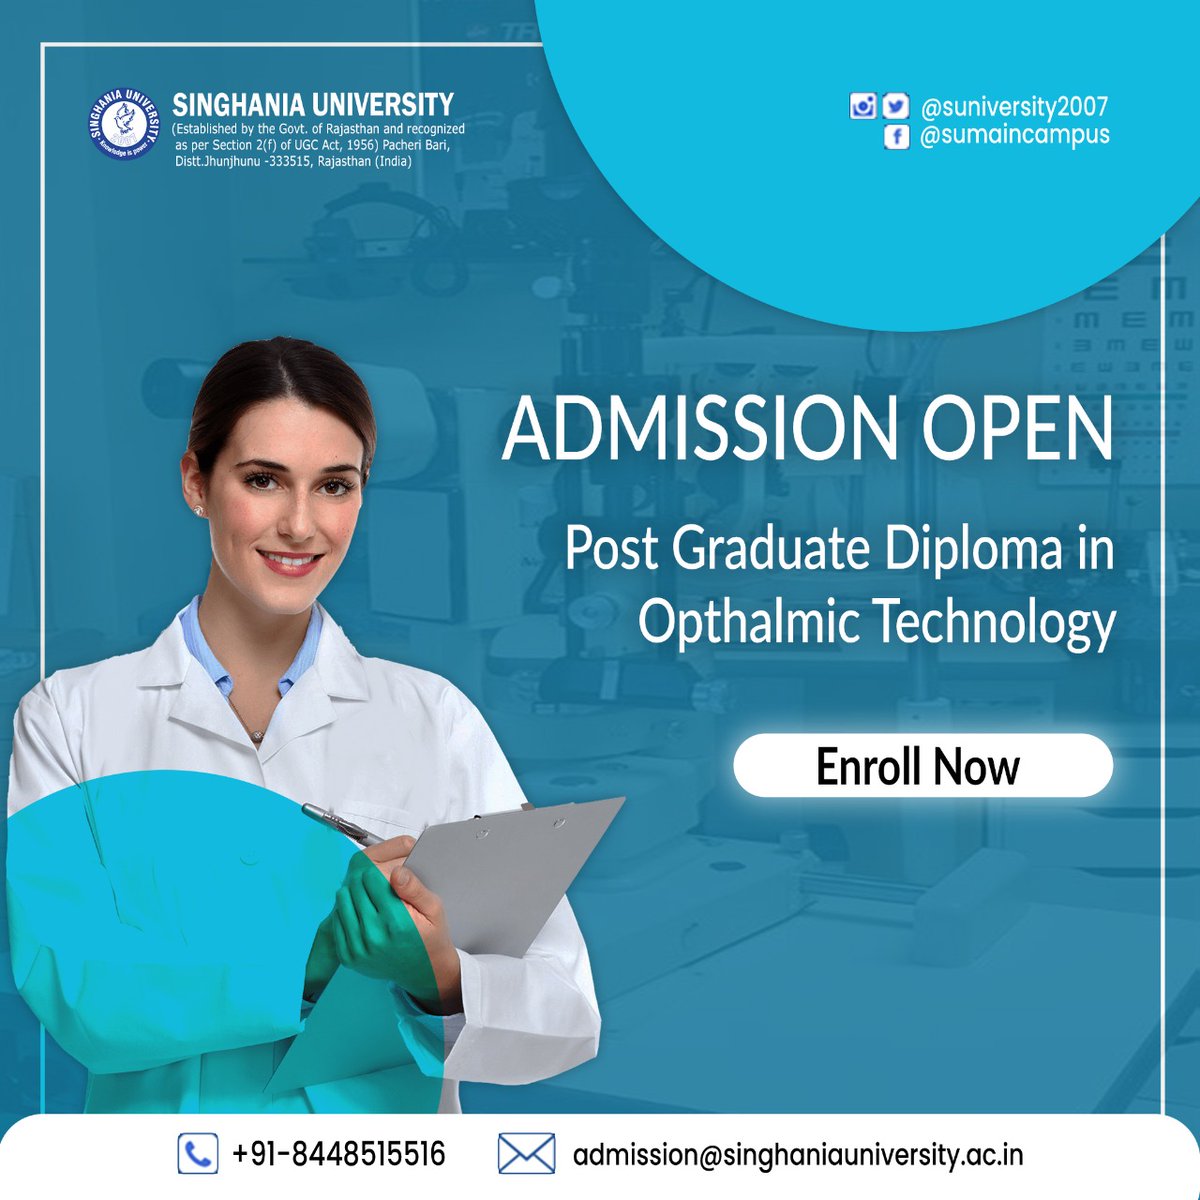 'Admission Open'
Post graduate diploma in opthalmic Technology
'Enroll Now'
.
.
.
#admissionsopen #admissionsopen202223 #graduation #postgraduatediploma #diploma #opthalmic #technology #university #degree